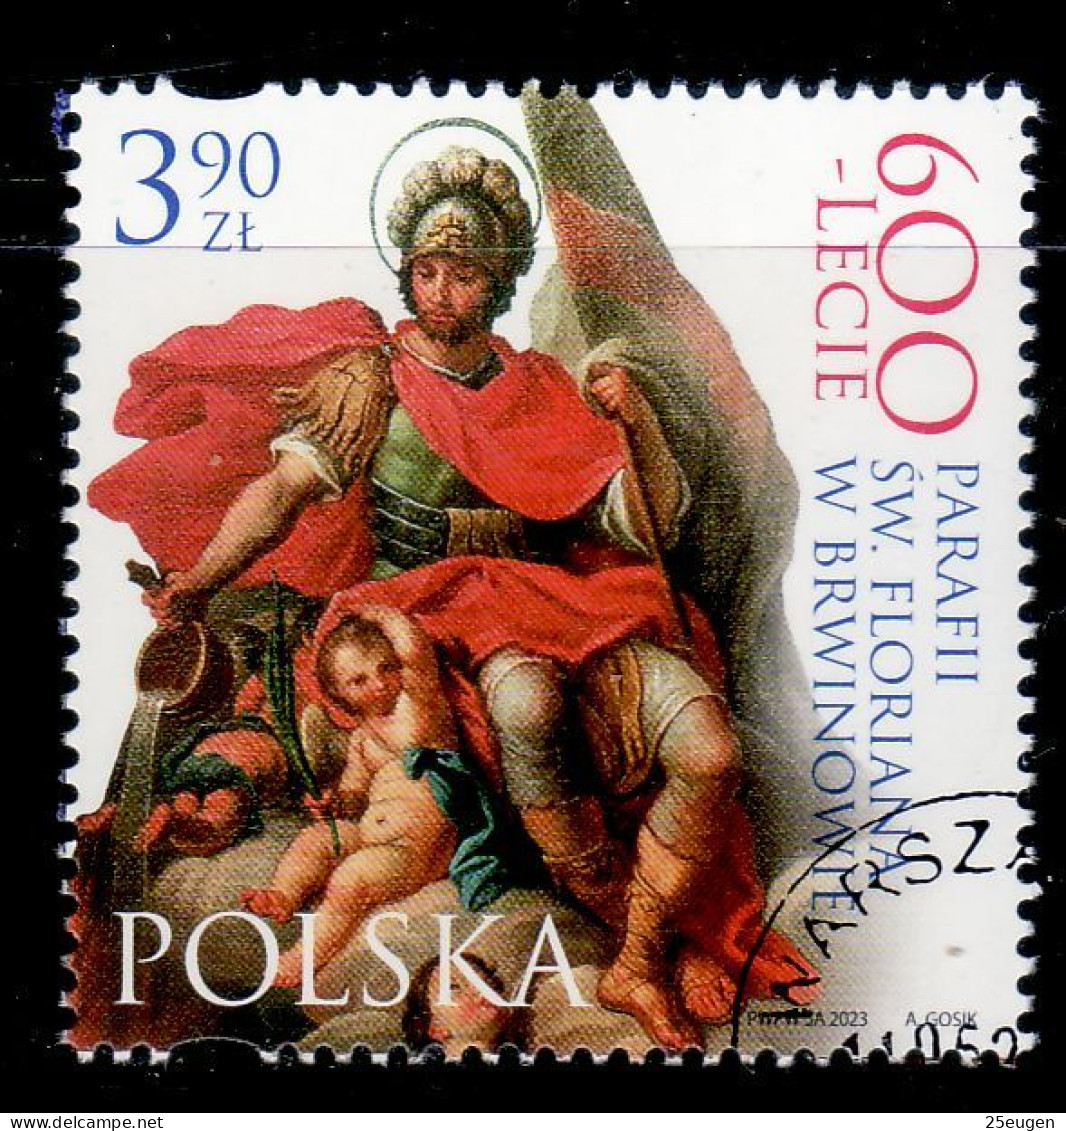 POLAND 2023  600th Anniversary Of The Parish Of St. Florian In Brwinów  USED - Gebraucht